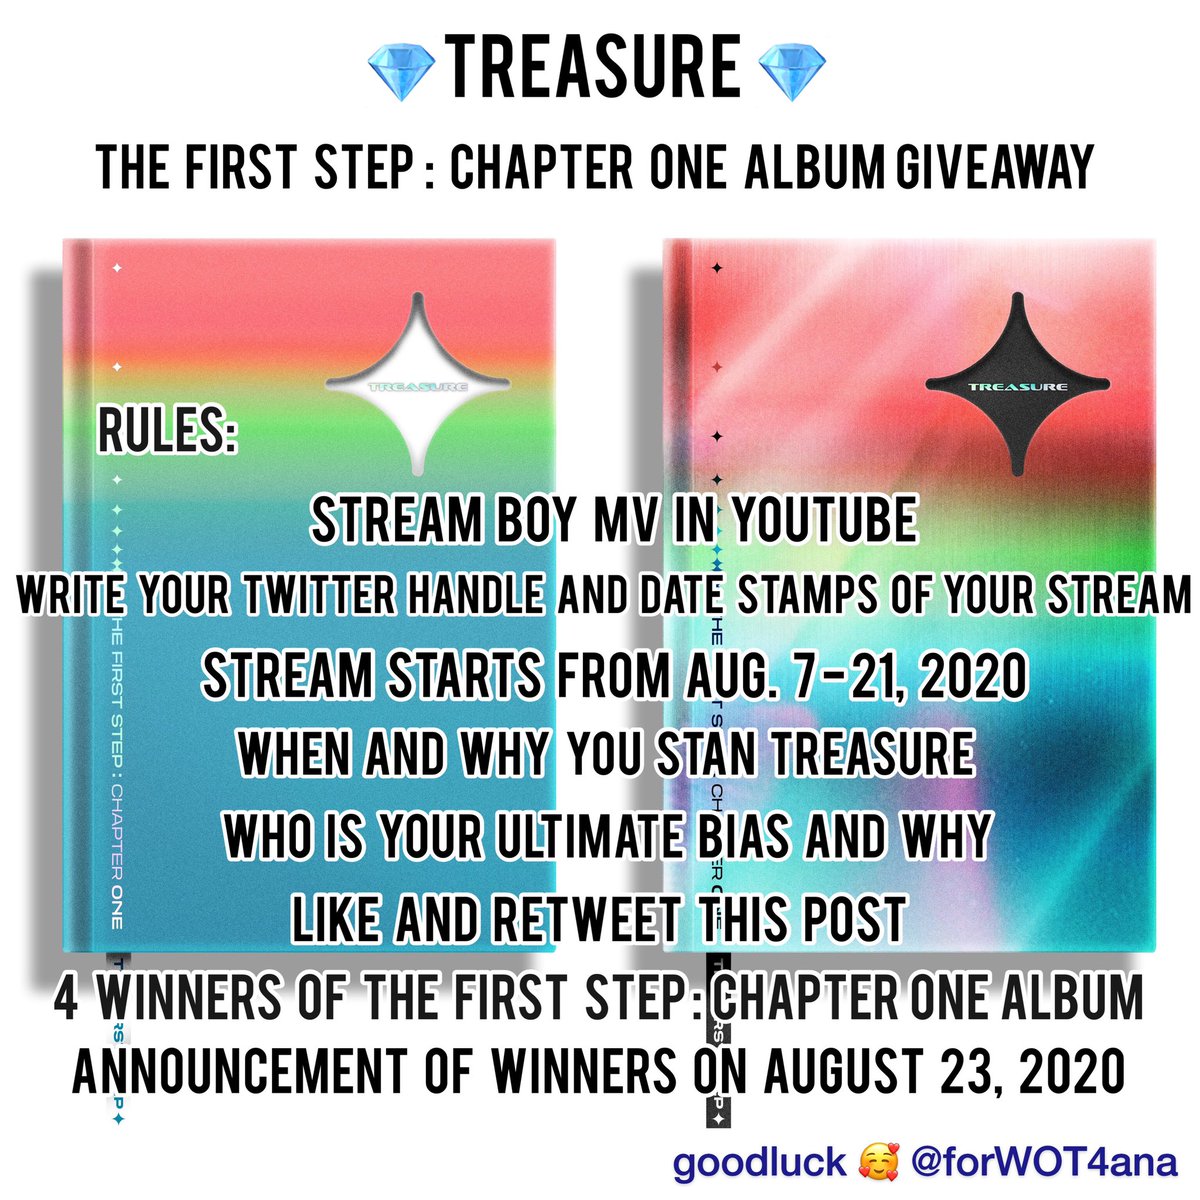 TREASURE THE FIRST STEP: CHAPTER ONE ALBUM GIVEAWAY FOR PH-TEUMES please follow the rules when you join this GA...reply your stream with  #TREASURE_FirstStepChapter1 ... goodluck and have fun while streaming!!! #트레저  #1stSINGLEALBUM  #THEFIRSTSTEP_CHAPTERONE  @treasuremembers